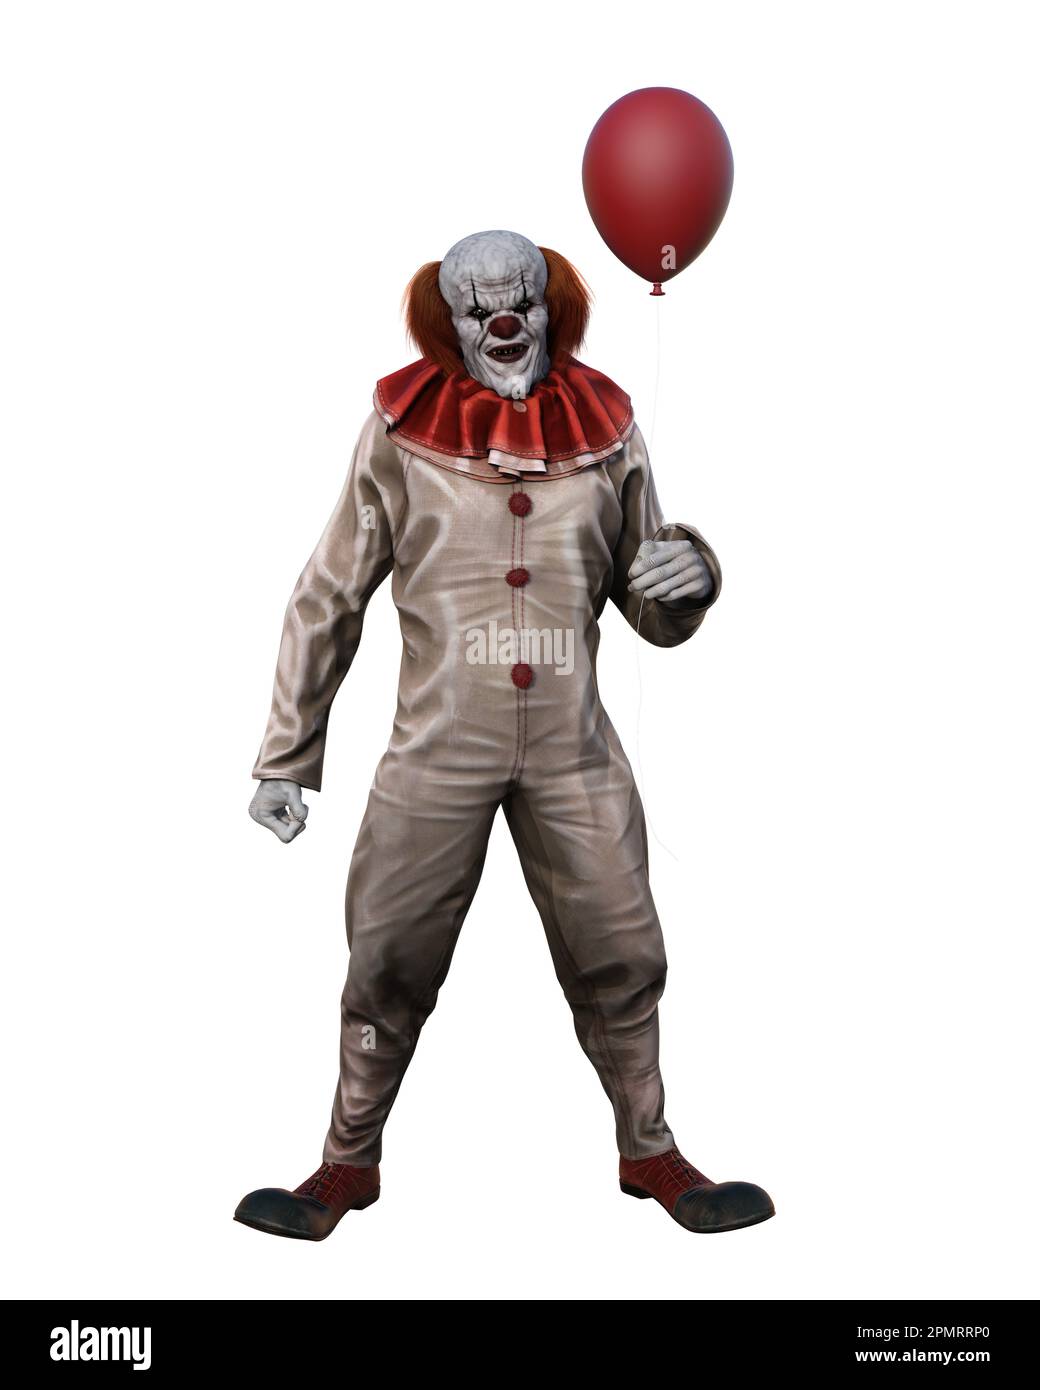 Scary clown standing in red and white costume with balloon and looking at camera with evil grin. 3D illustration isolated on white background. Stock Photo